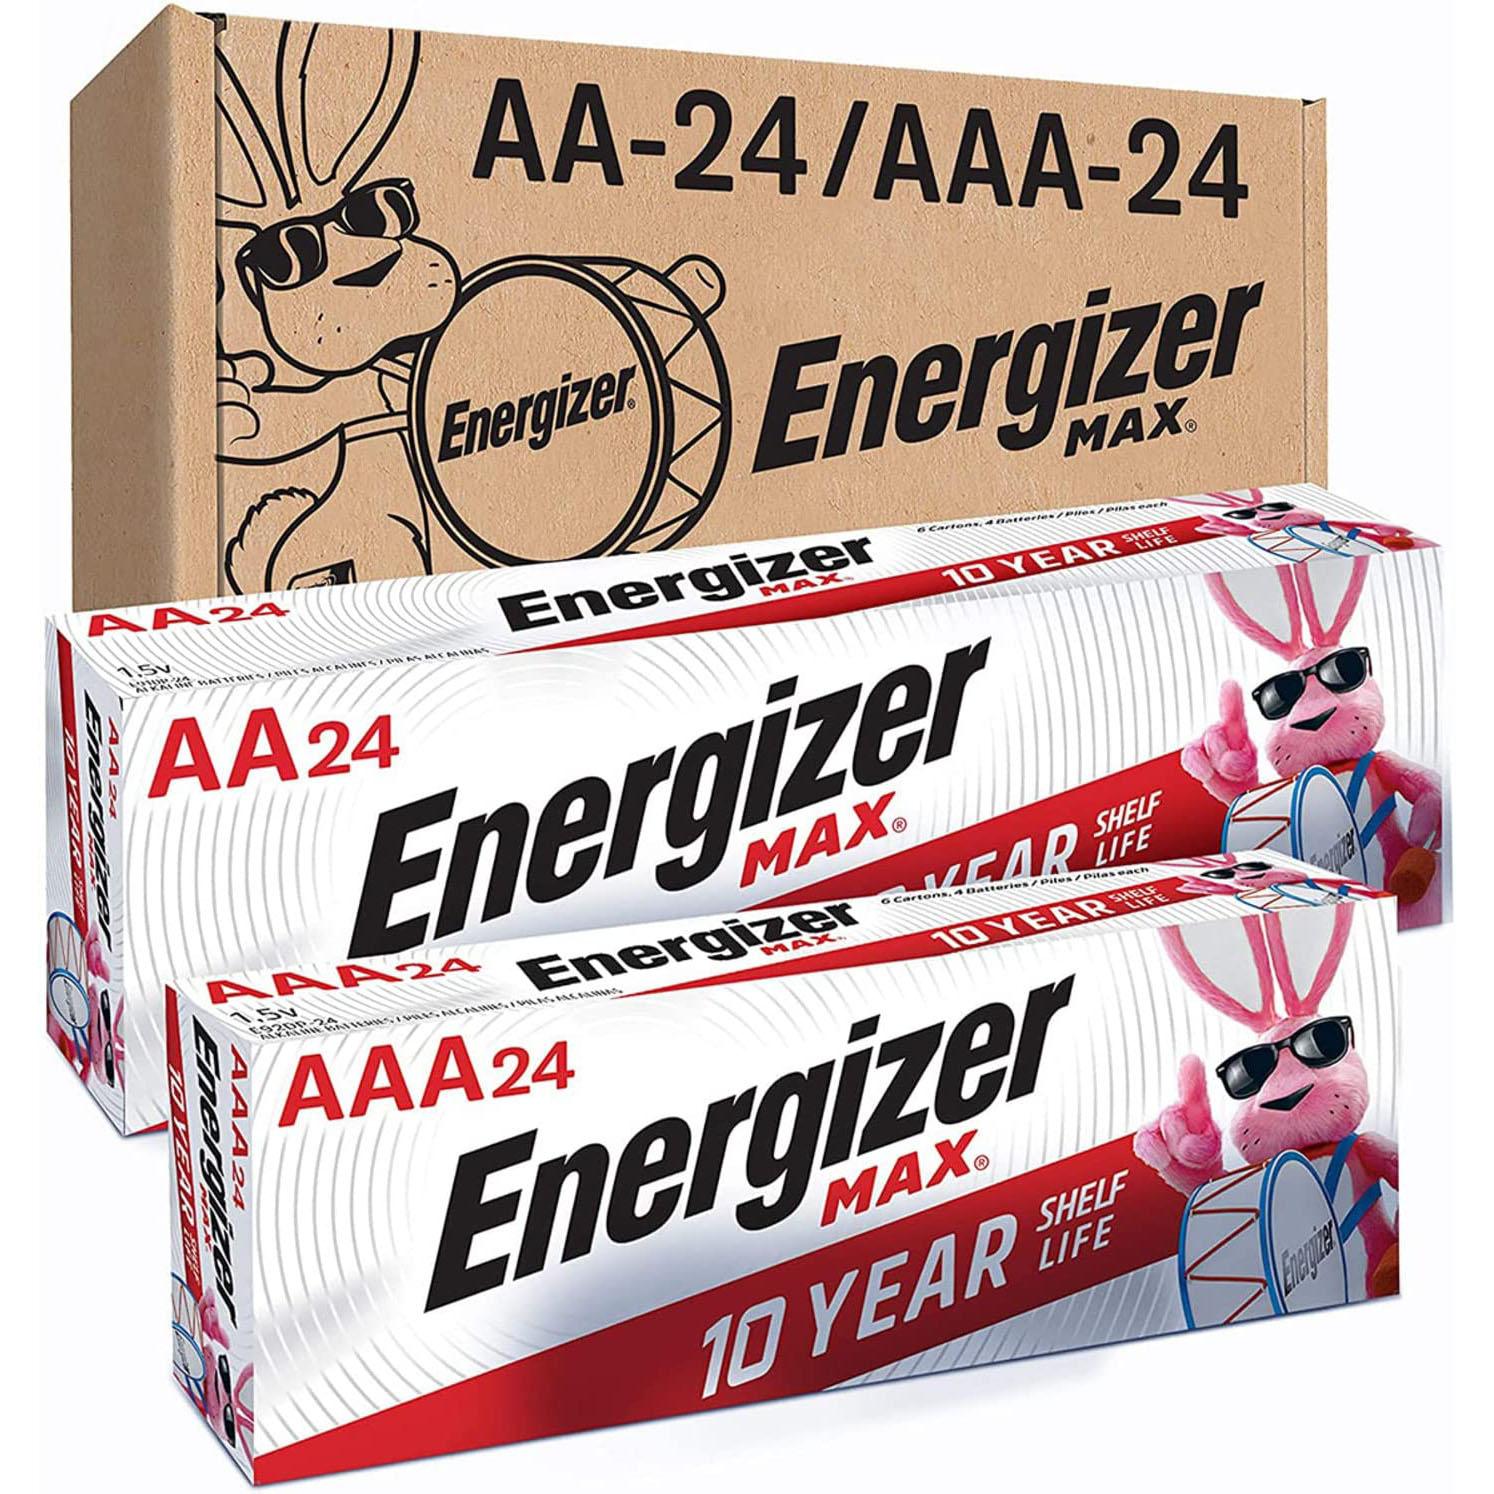 Energizer MAX 24 AA + 22 AAA Battery Combo Pack for $21.97 Shipped